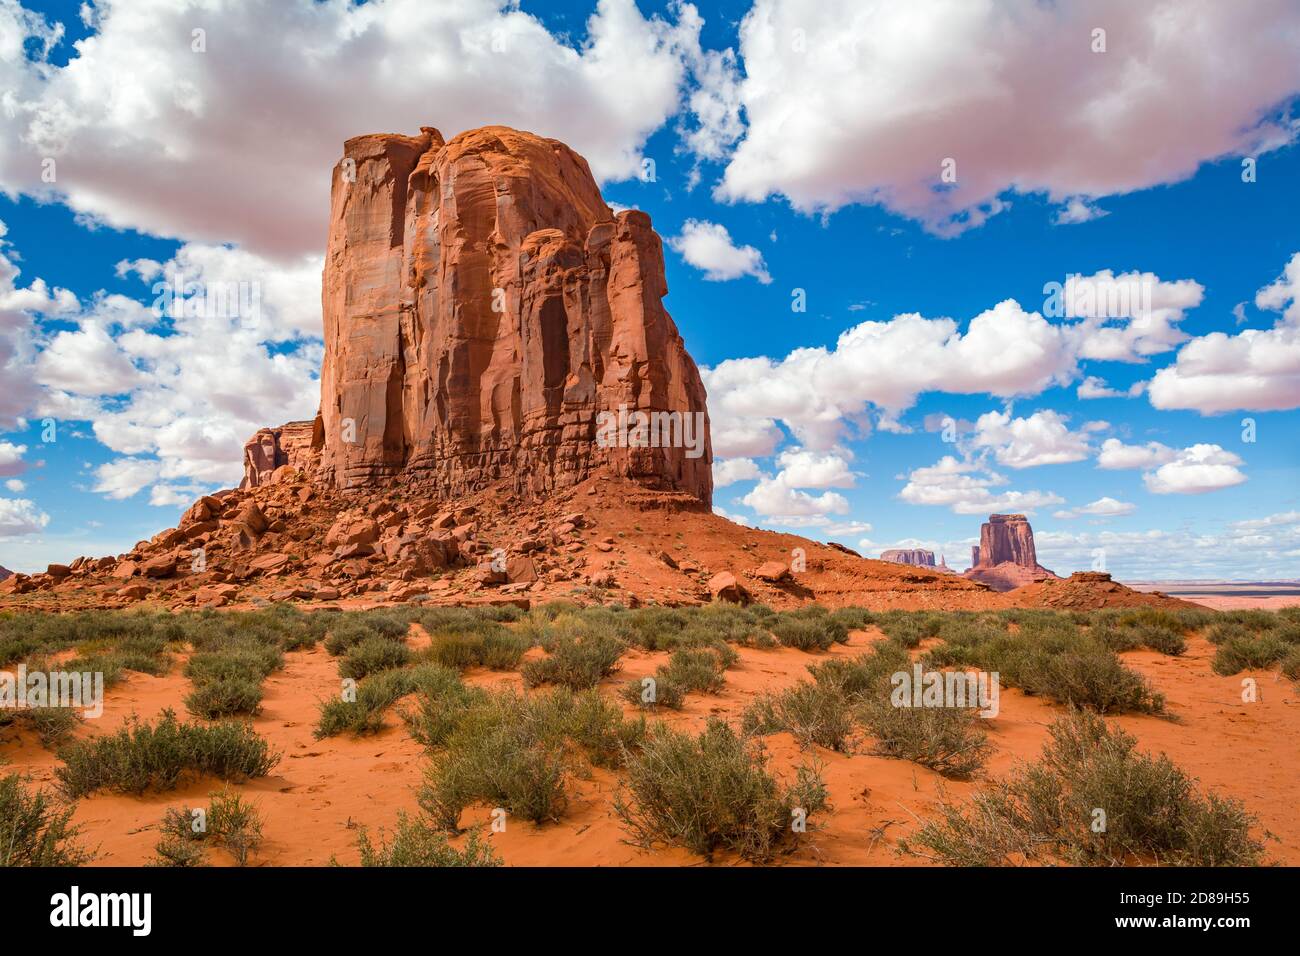 Big red rocks of Monument Valley. Navajo Tribal Park landscape, USA Stock Photo